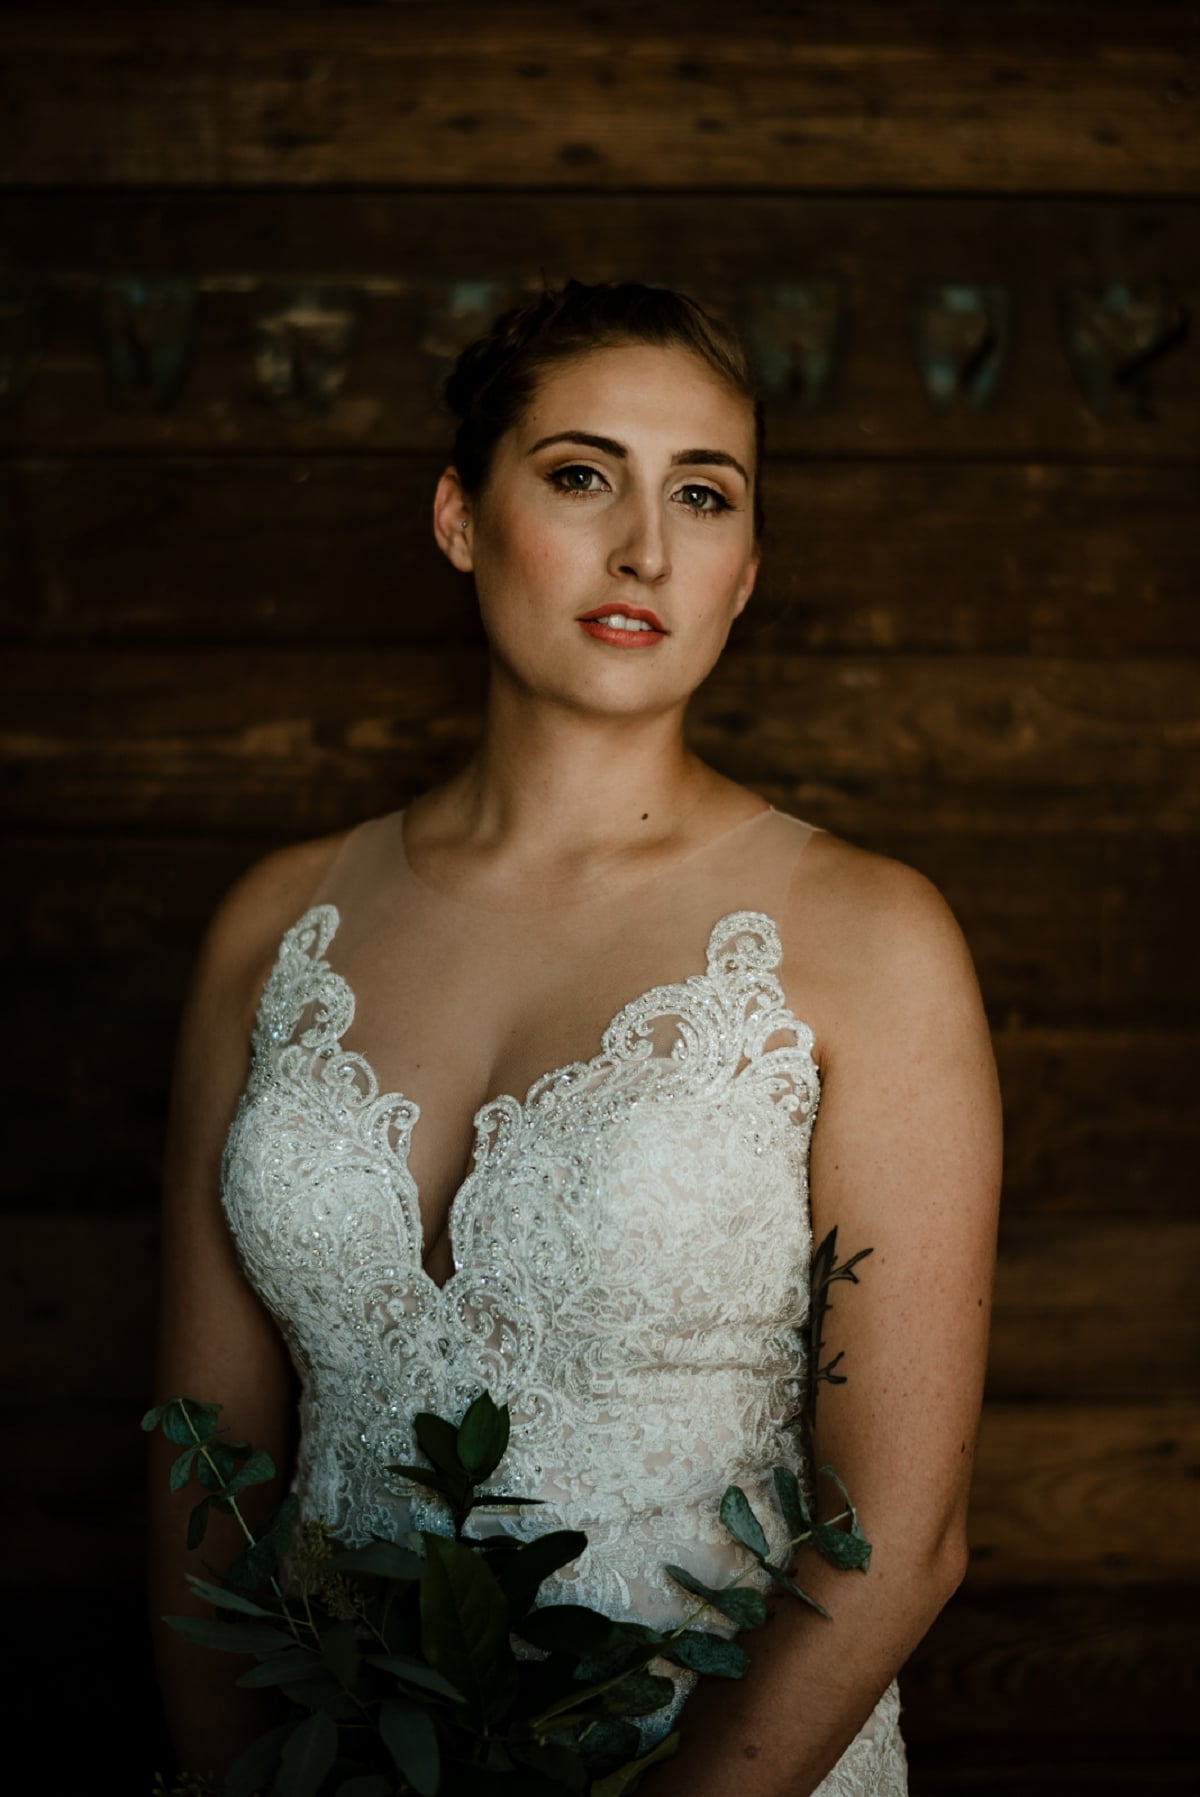 union on eighth bridal session